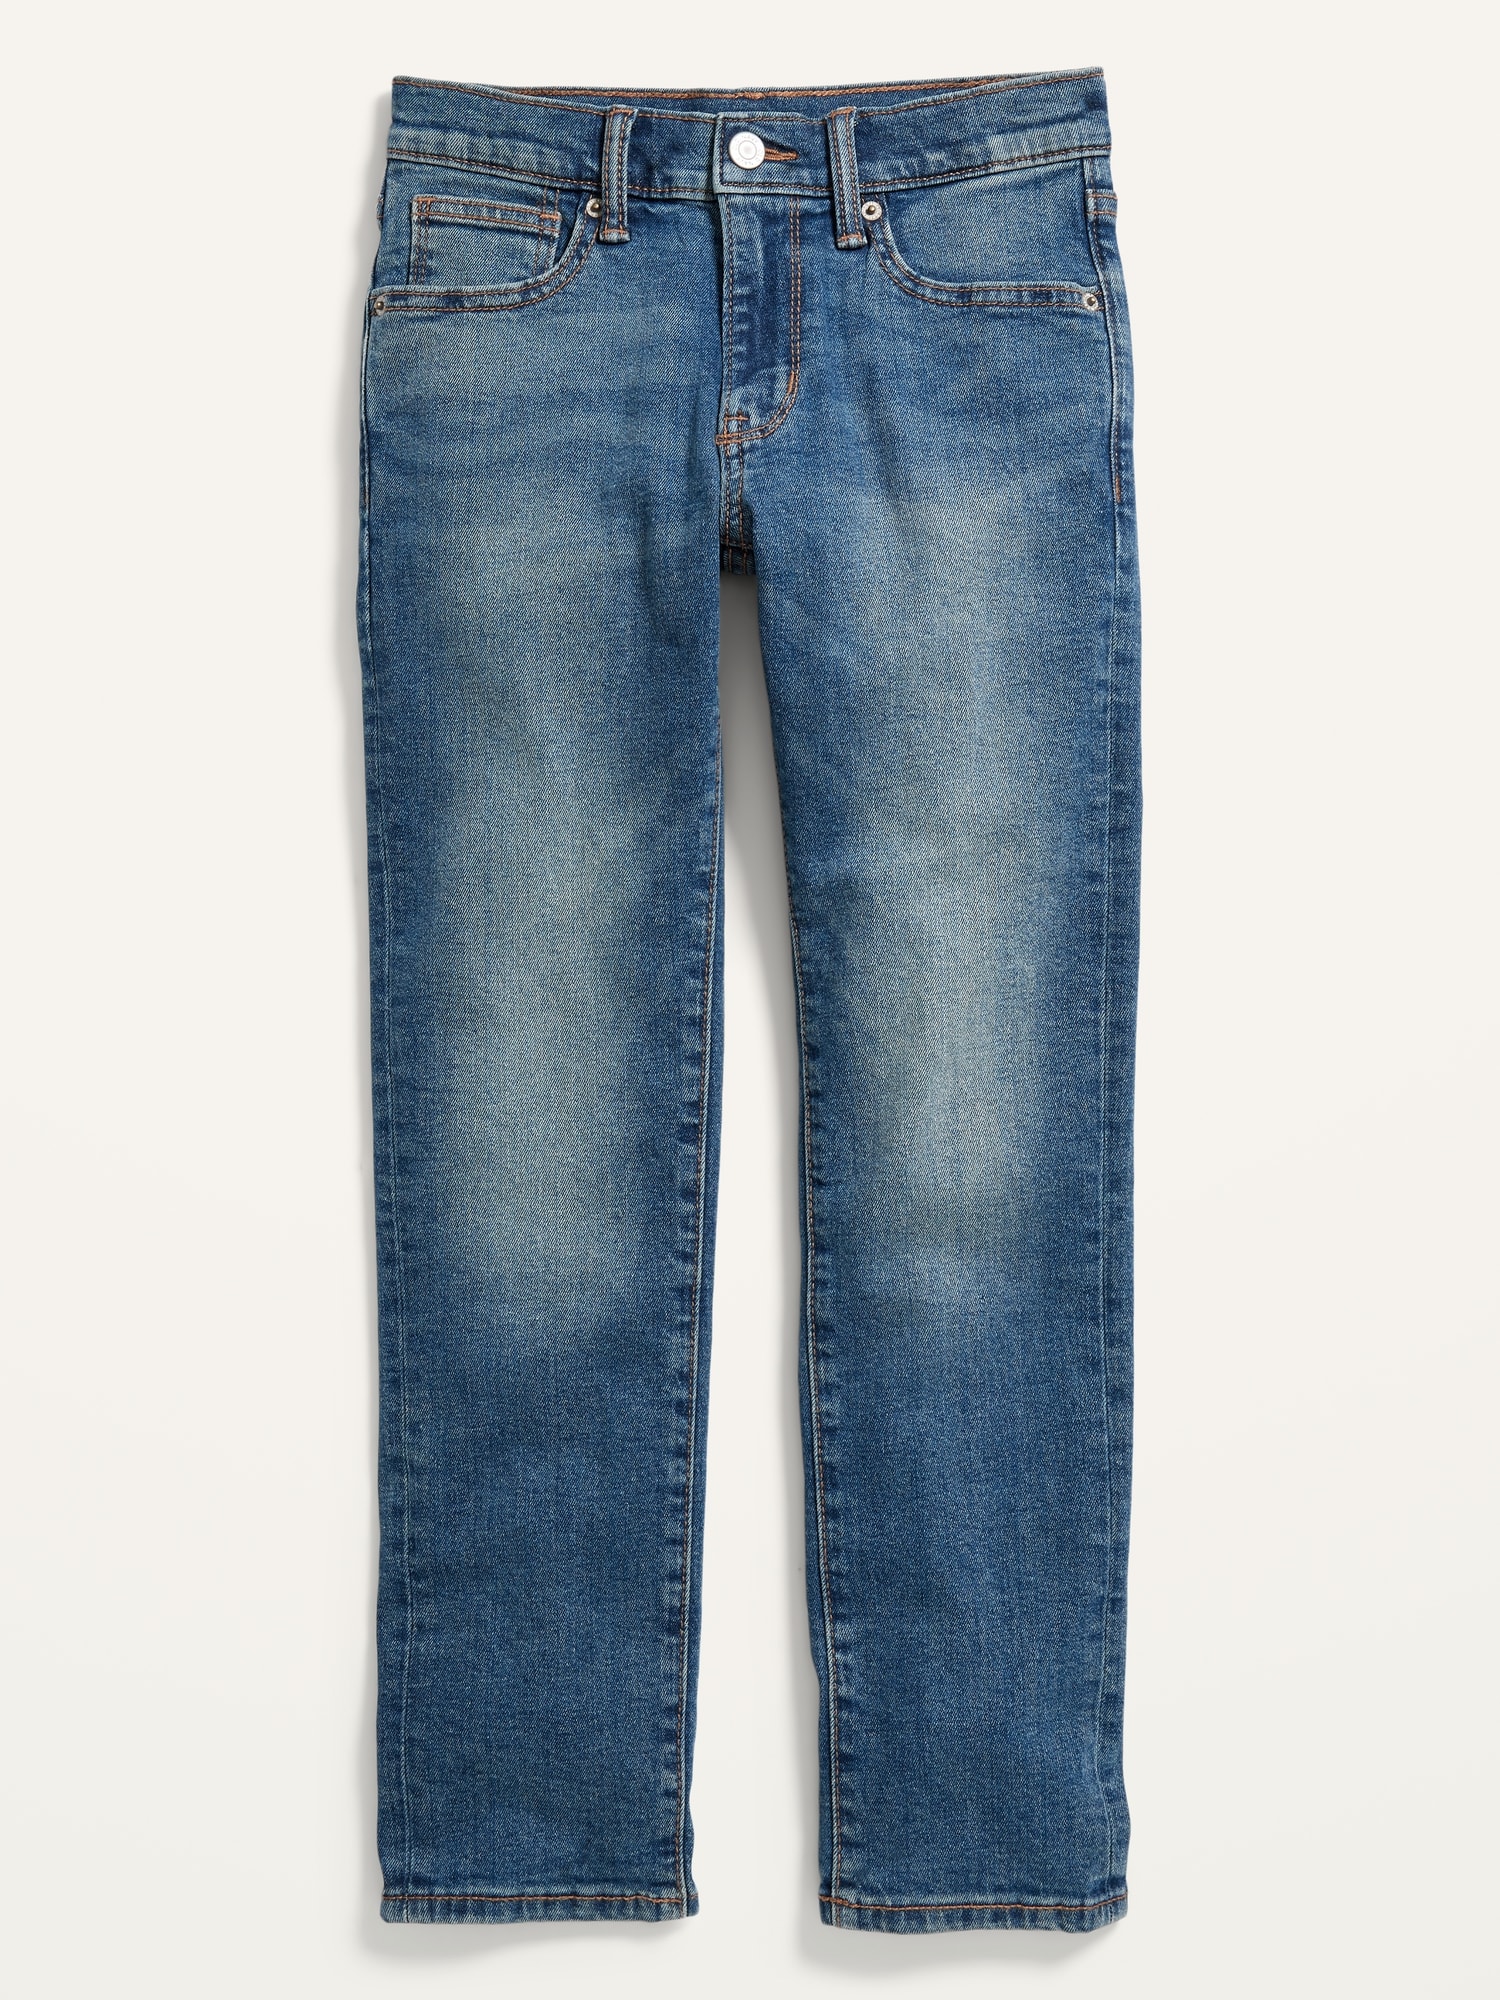 Old Navy Skinny Jeans for Boys blue. 1